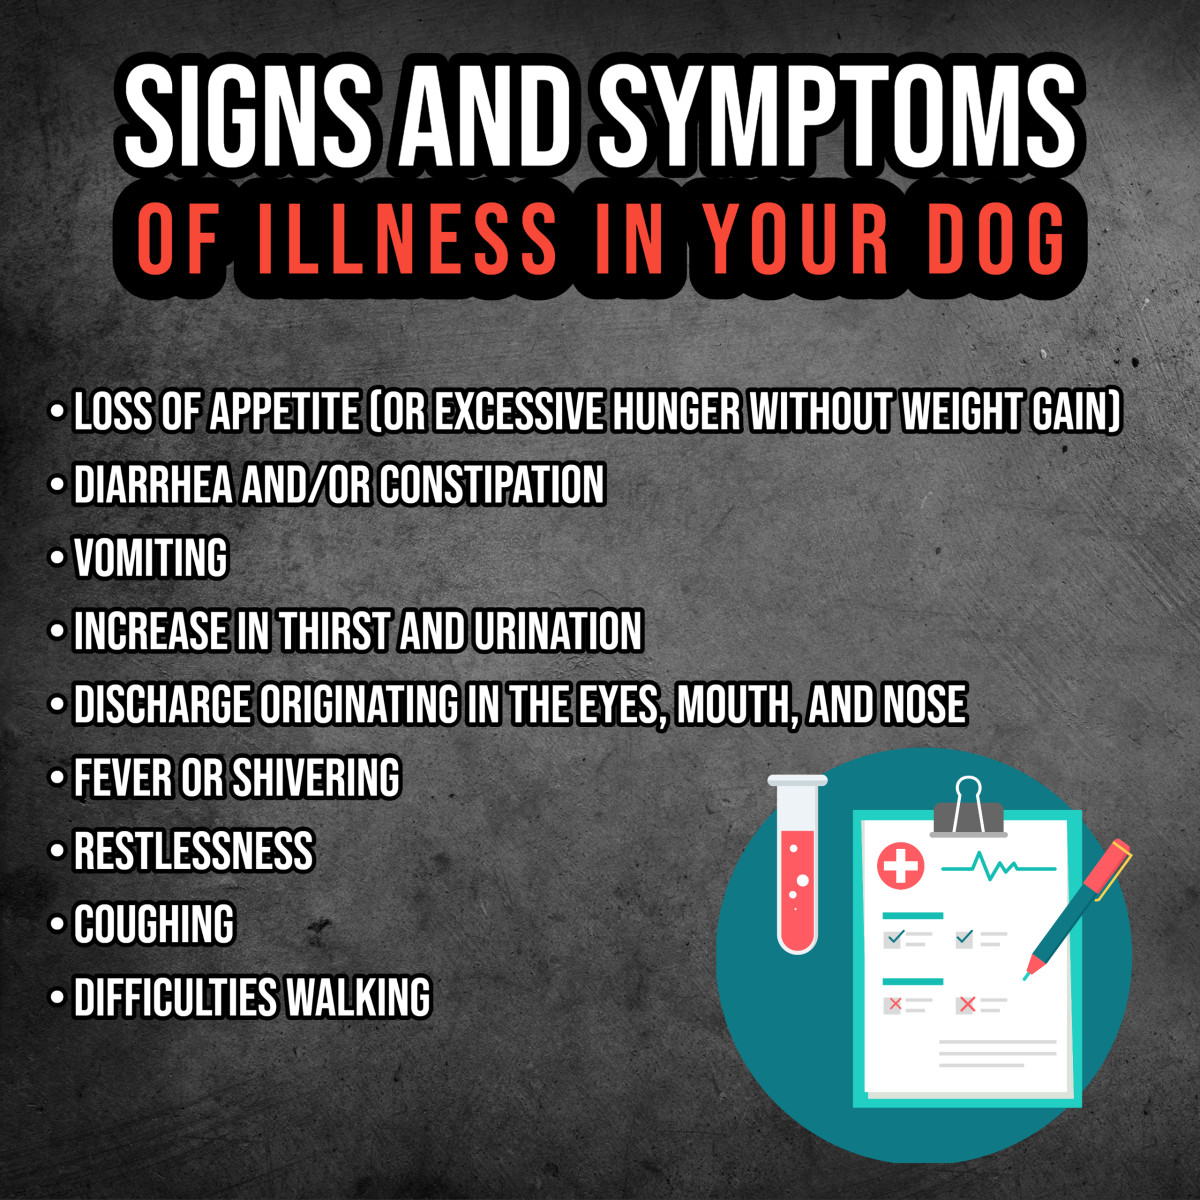 Signs and symptoms of illness in the French Bulldog.